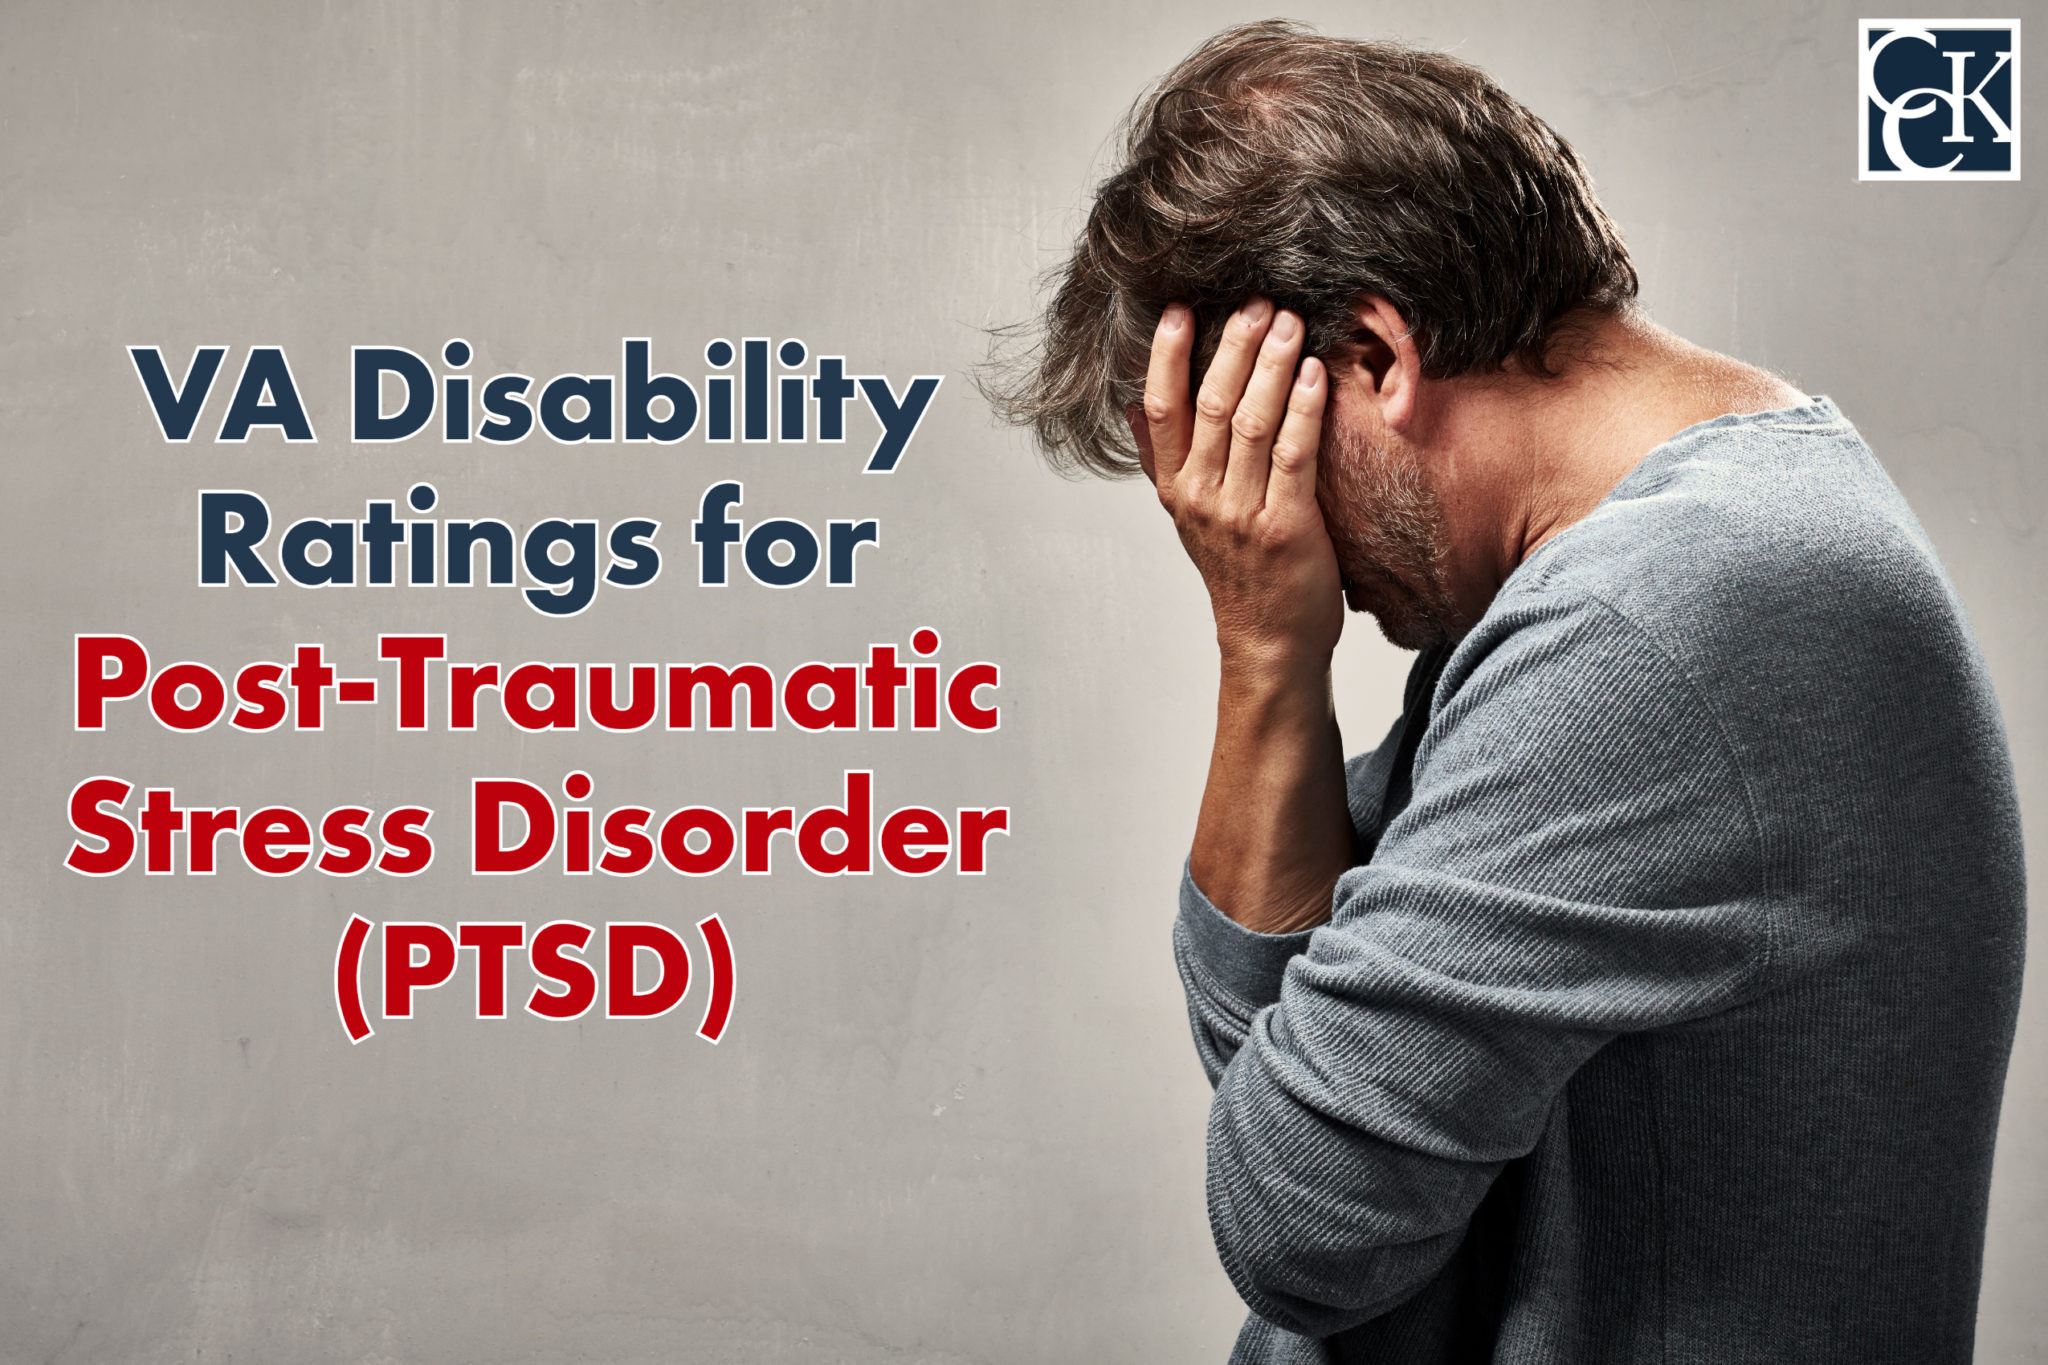 VA Disability Rating For PTSD  The PTSD Rating Scale Guide 2048x1365 